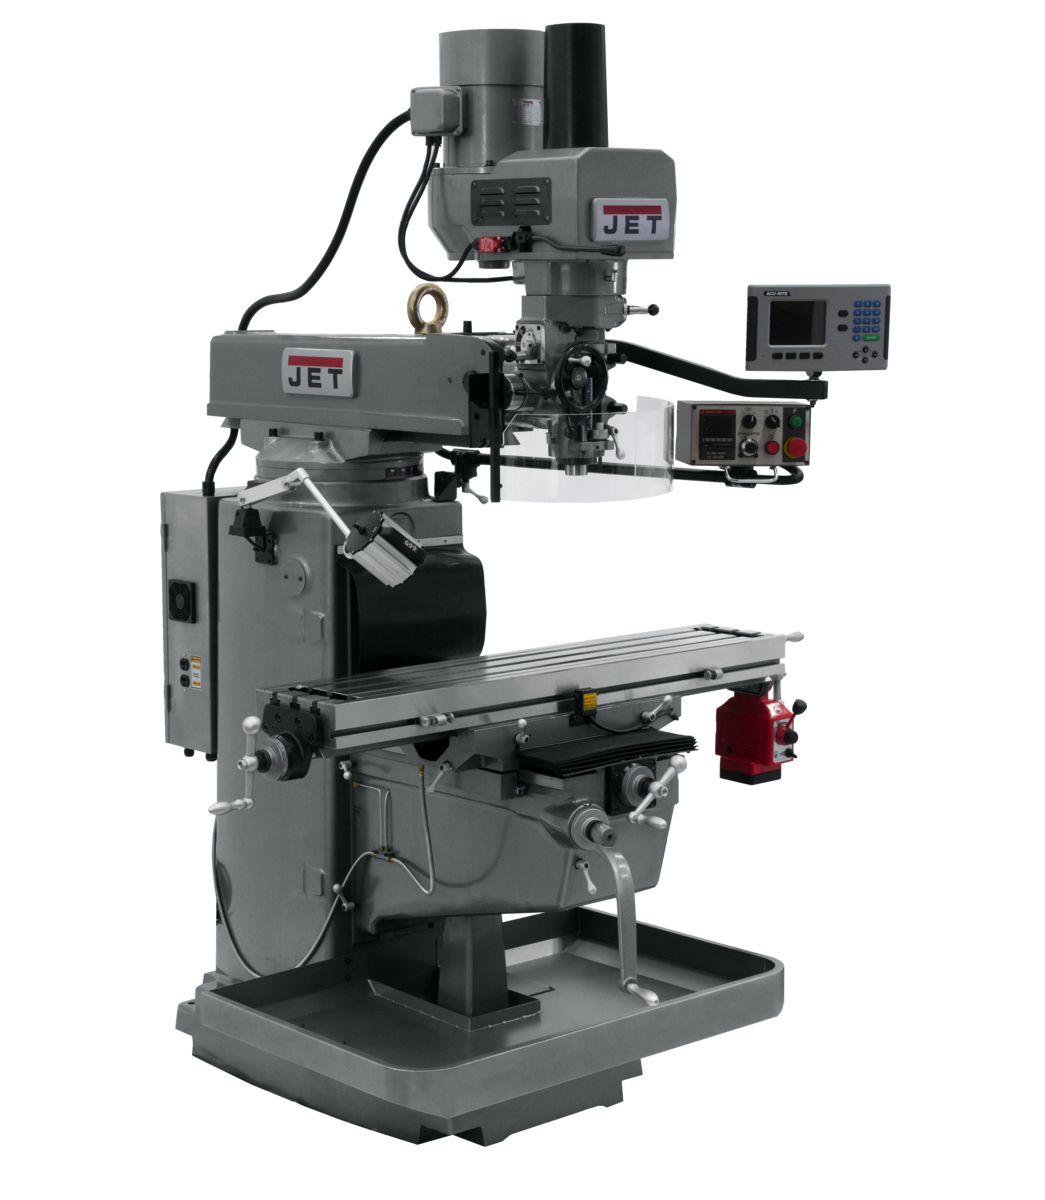 JTM-1050EVS2/230 Mill With 3-Axis Acu-Rite 203 DRO (Knee) With X-Axis Powerfeed and Air Powered Dra